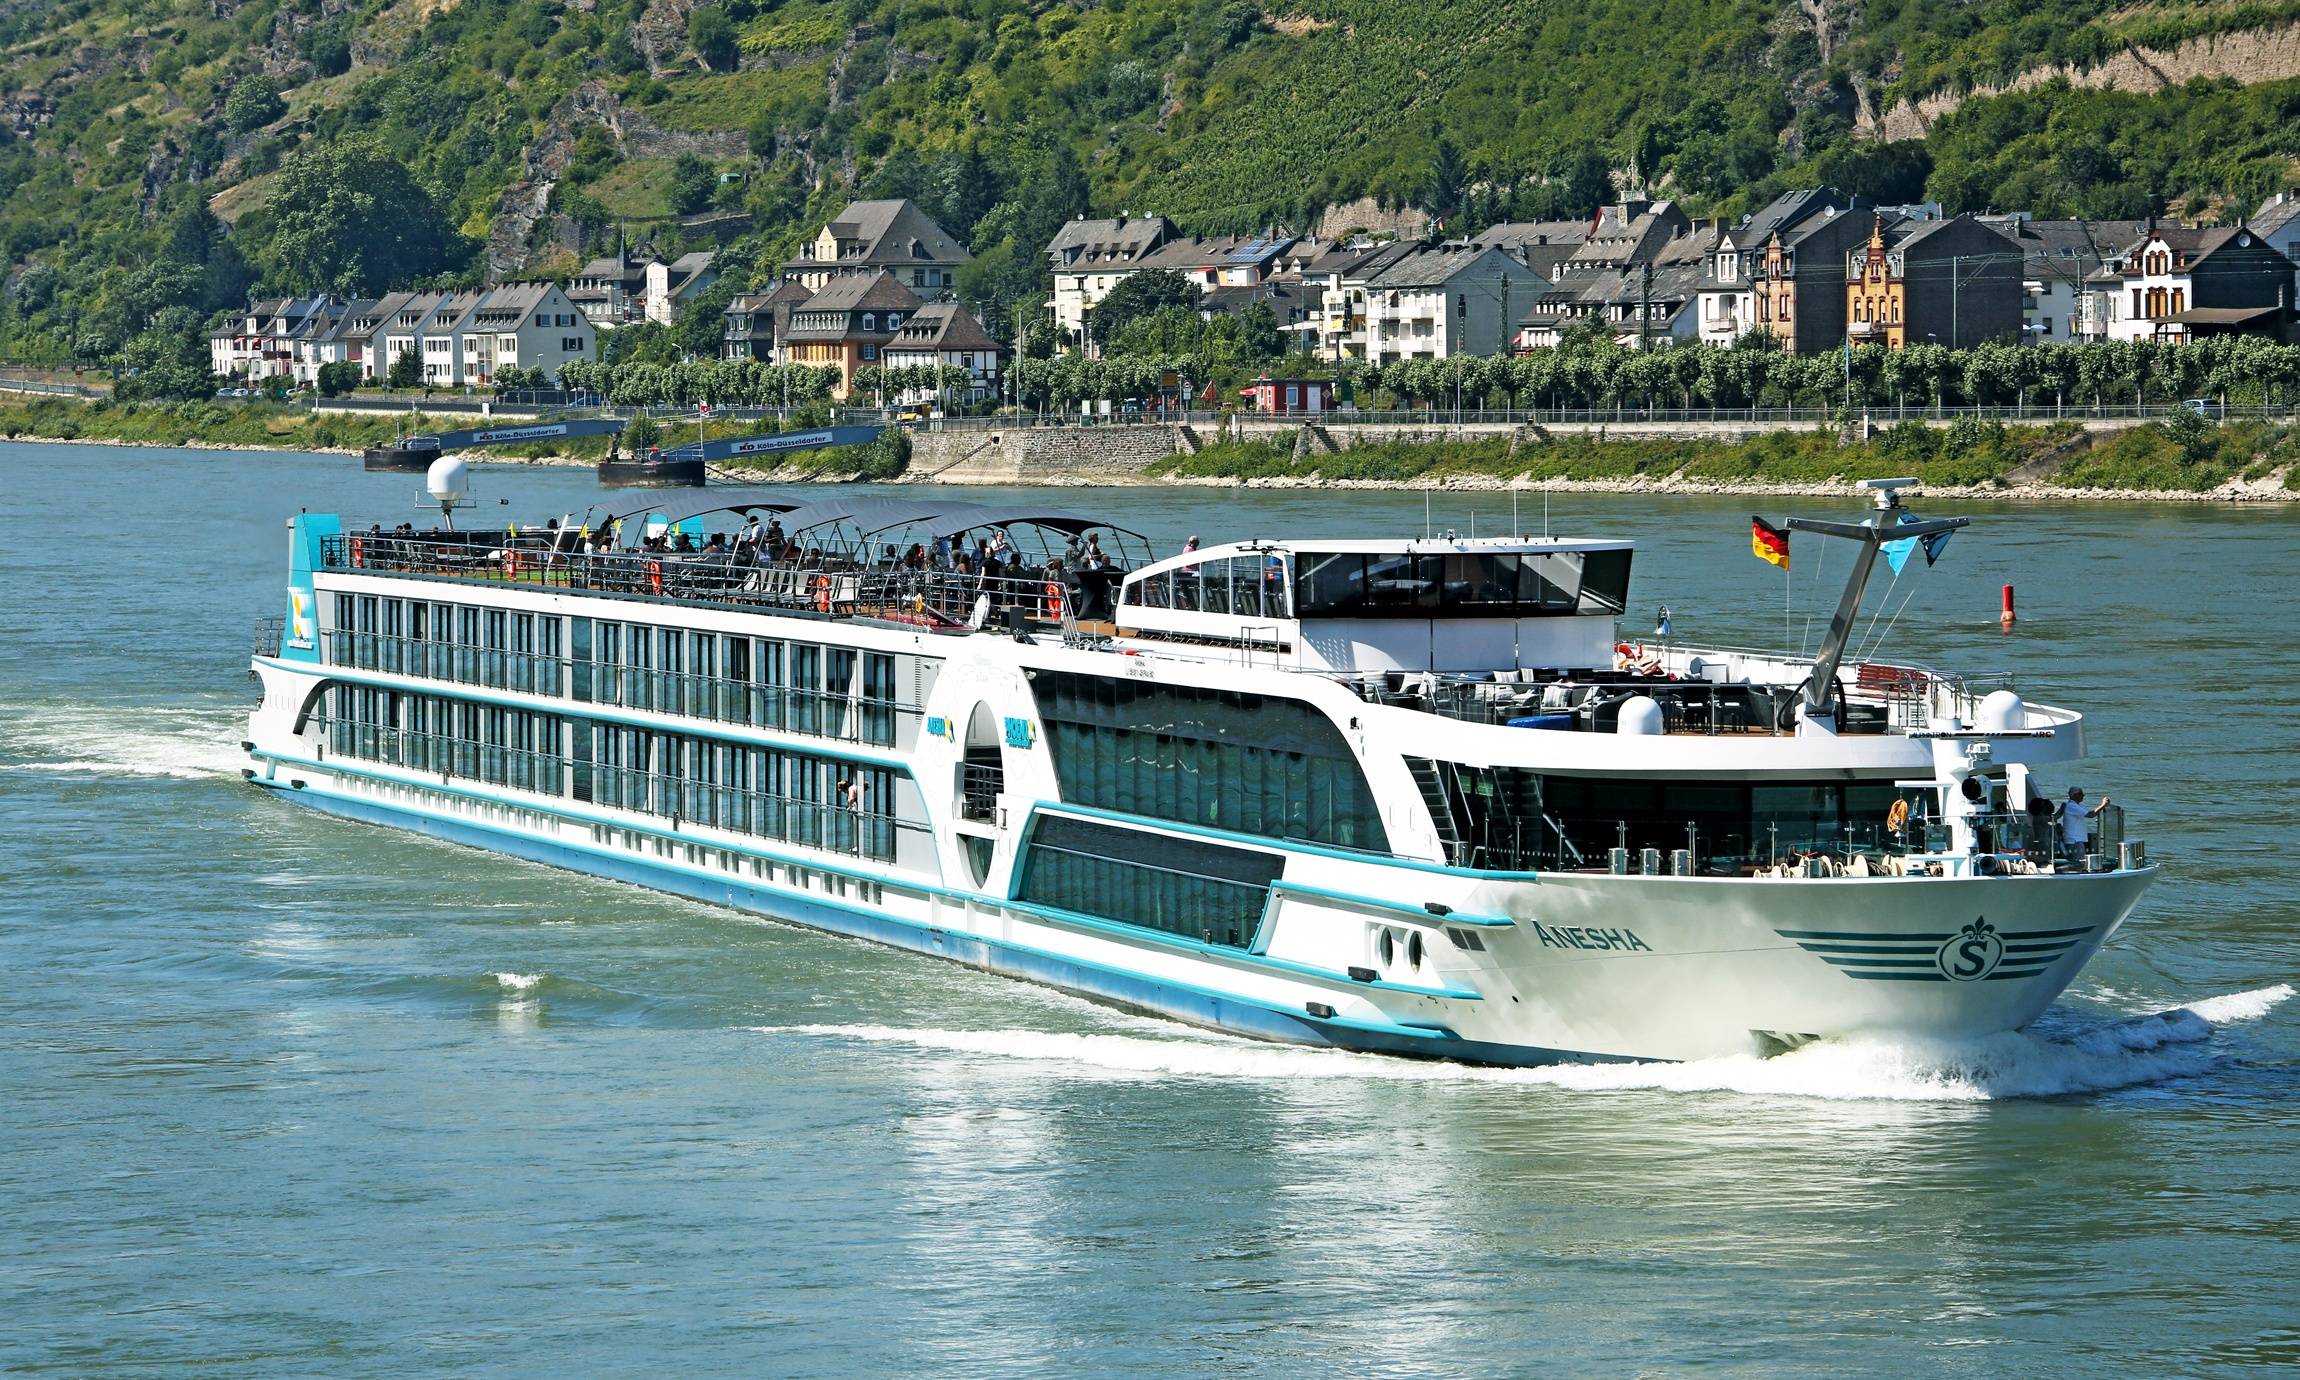 M/S Anesha 1 Tage Eventreise Rhein - "All you need is love"